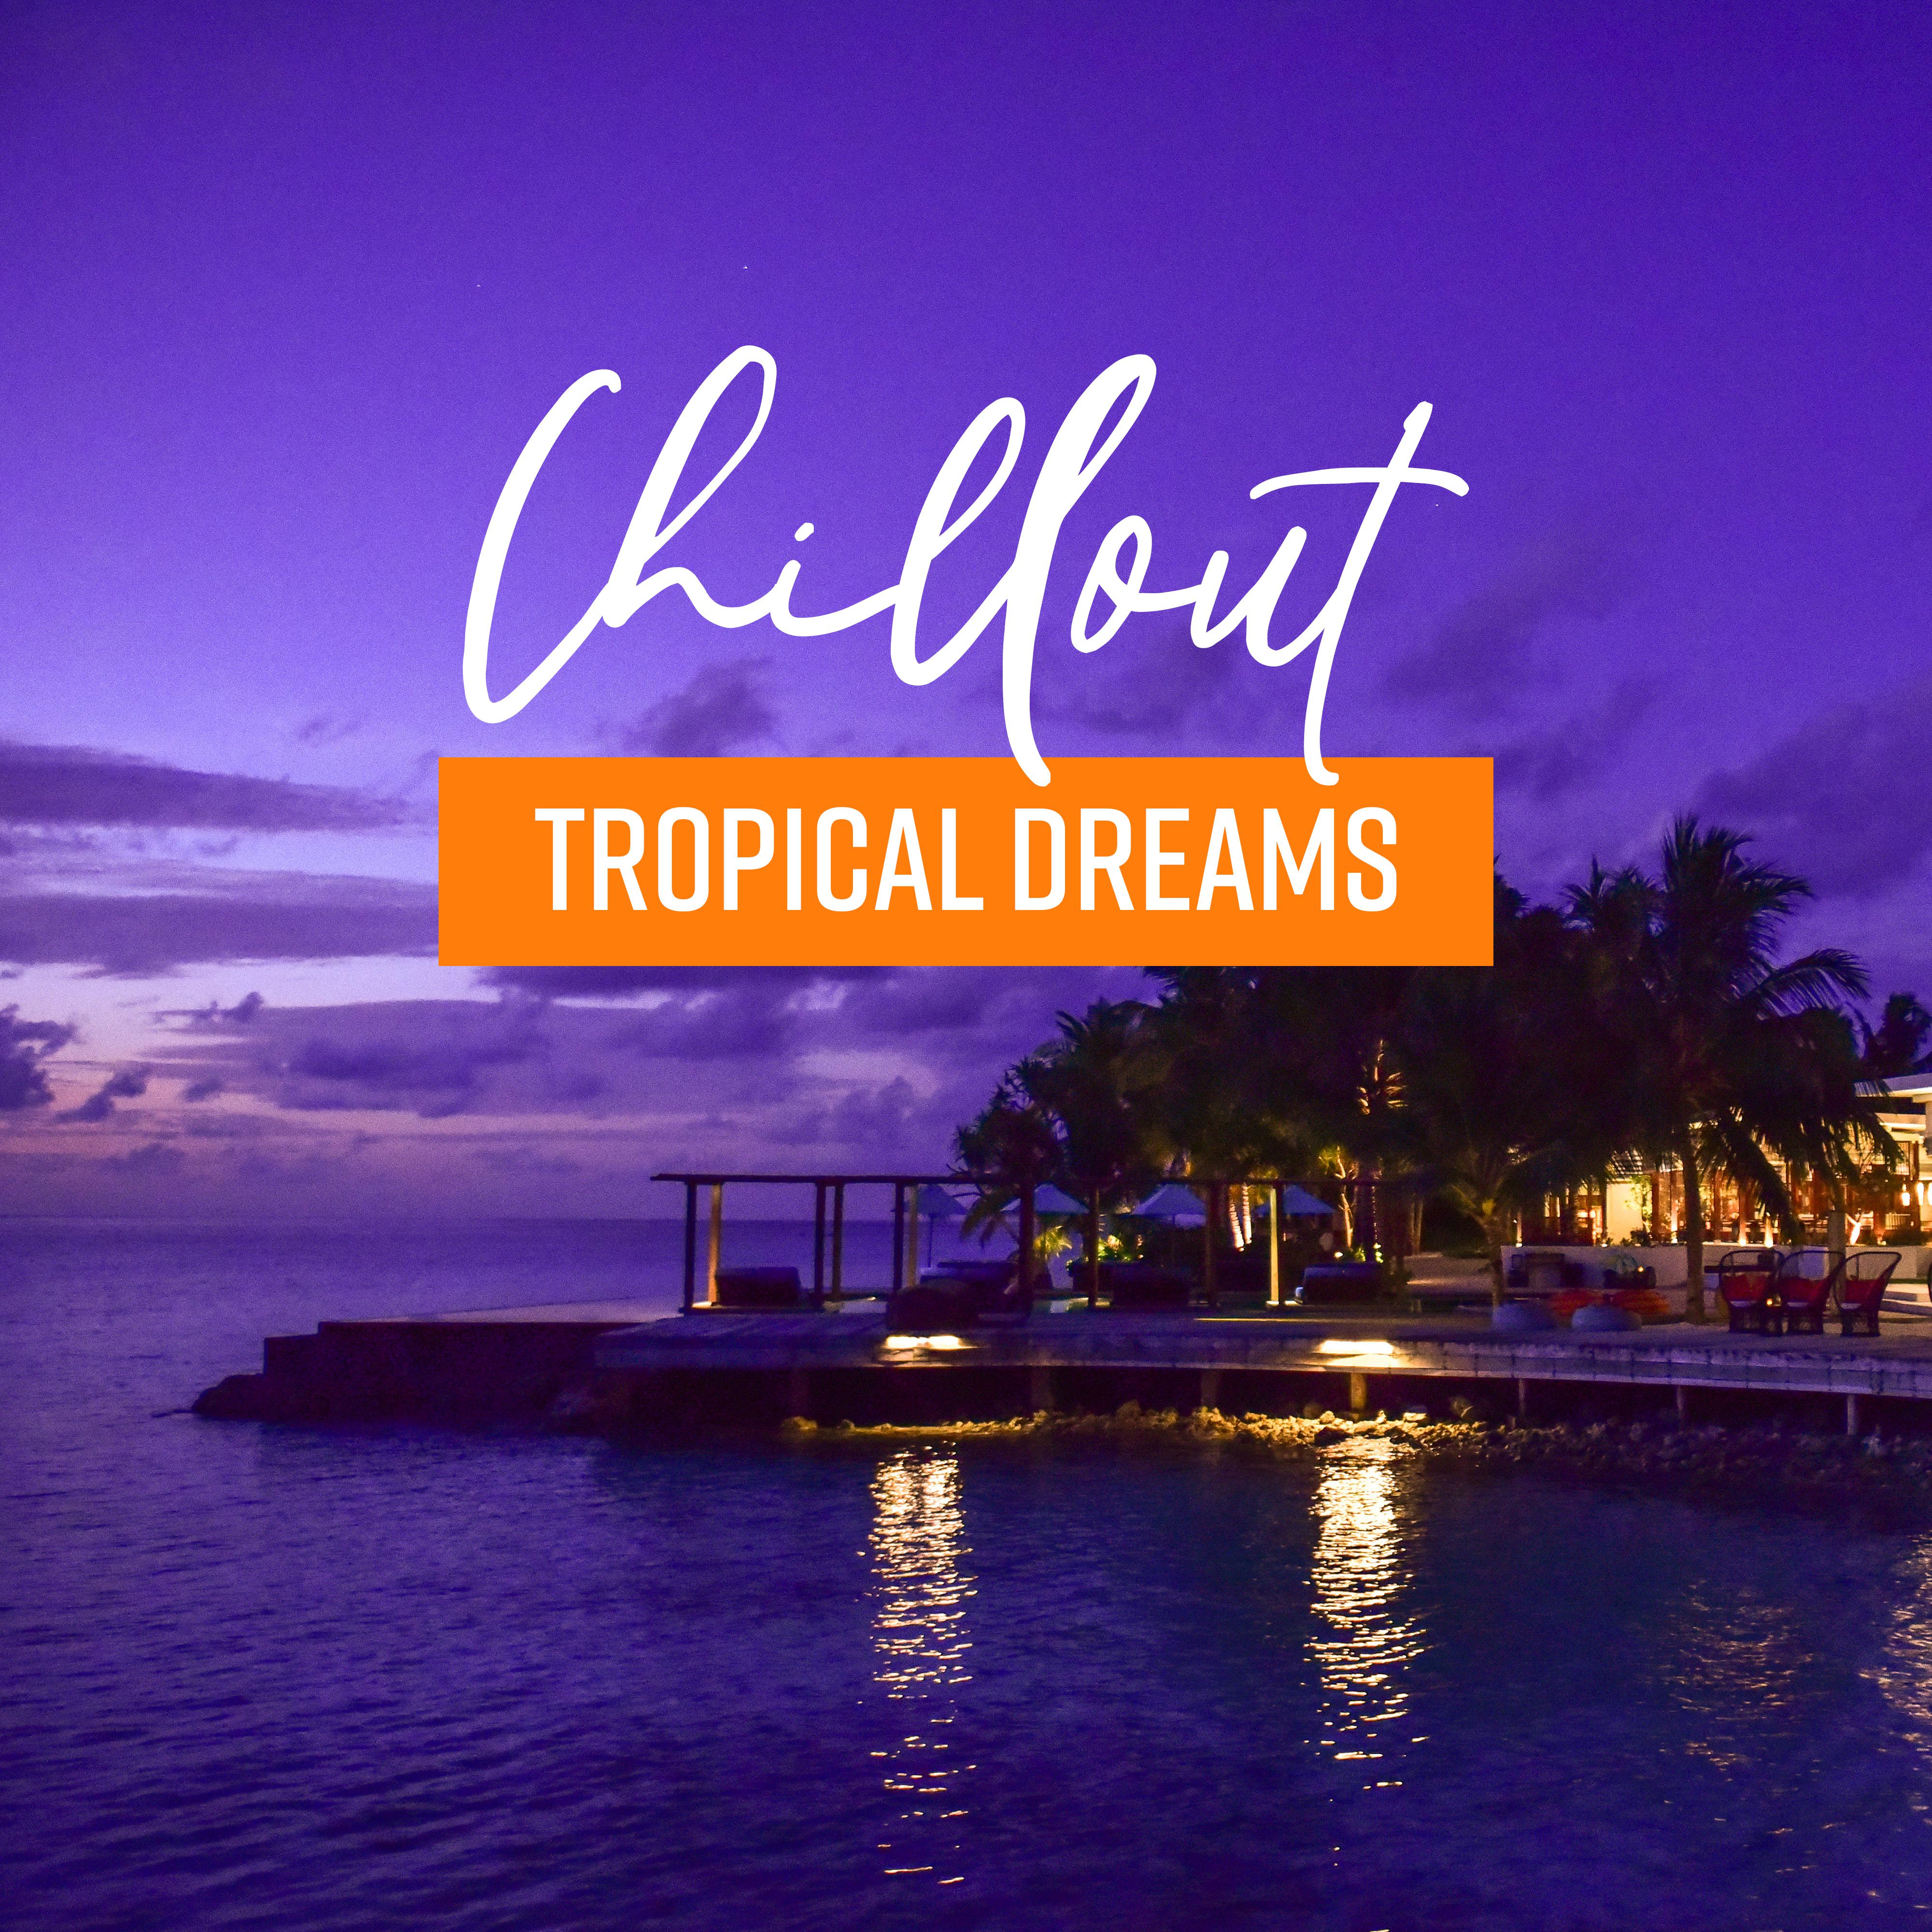 Chillout Tropical Deams: 2019 Chill Out Soft Electronic Vibes for Beach Relaxation with Cocktails & Friends